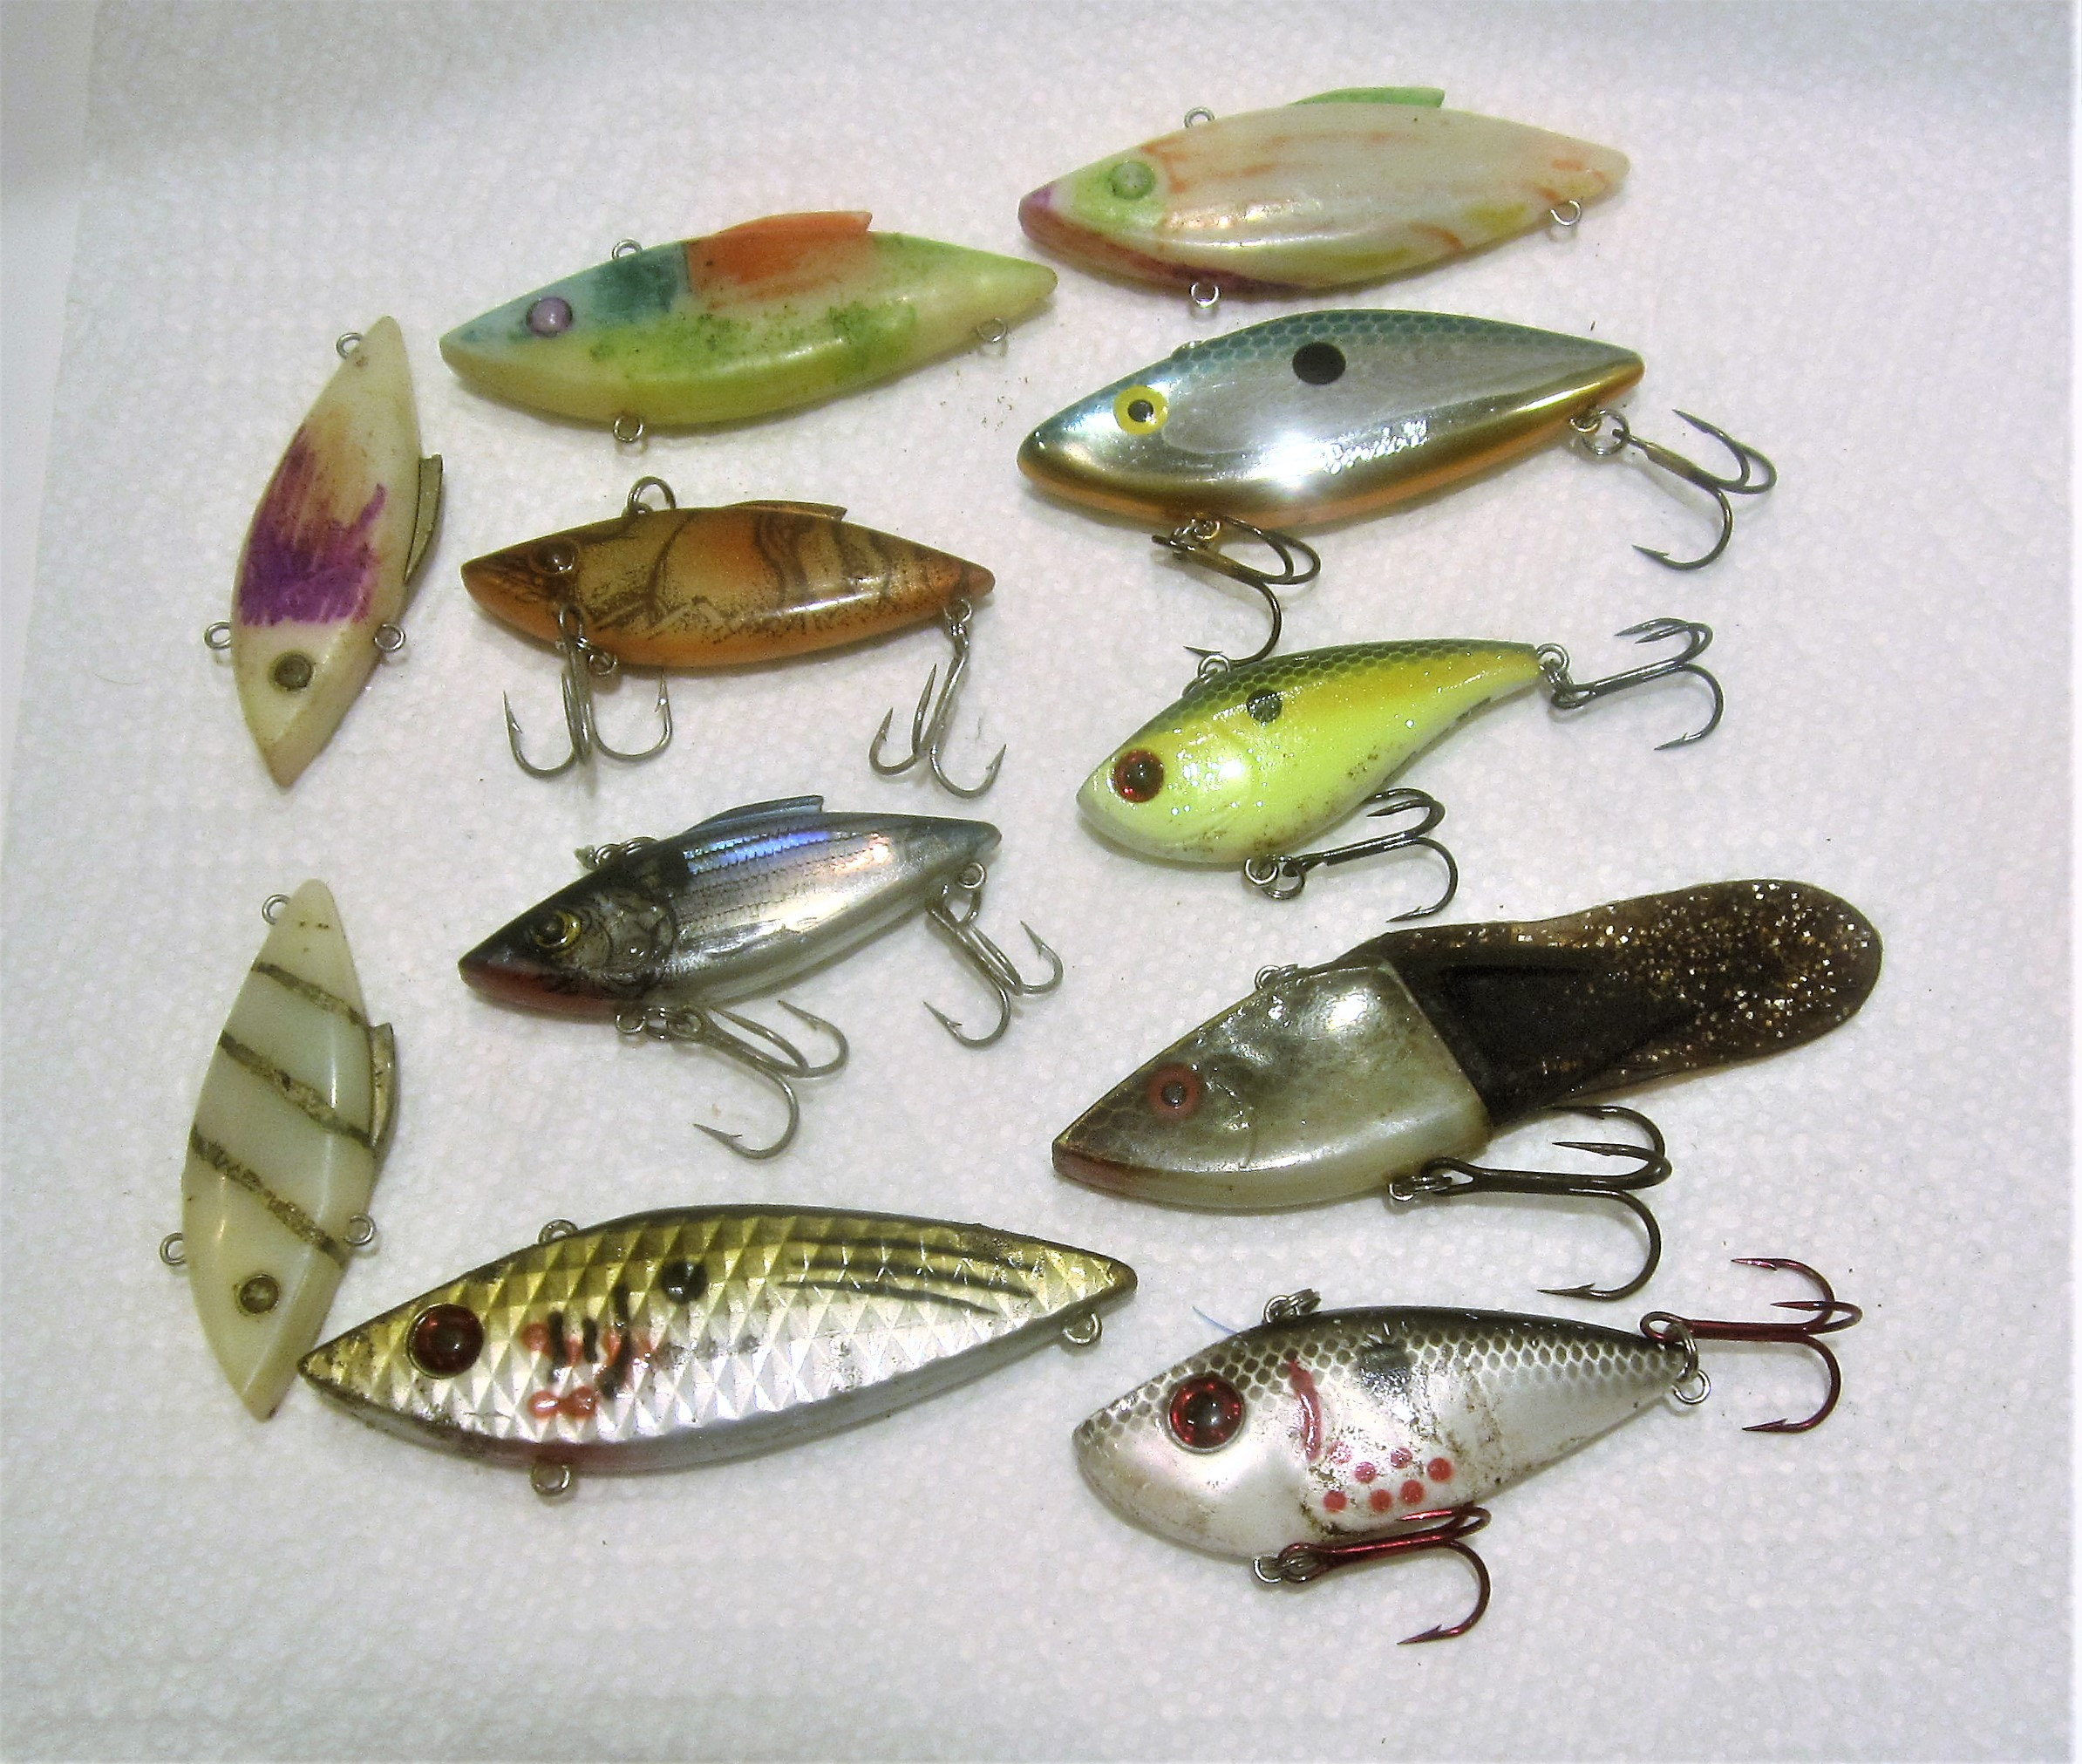 Lot of 11 Rattle Lures / Many Cordell Spot / Six With Hooks / Five No